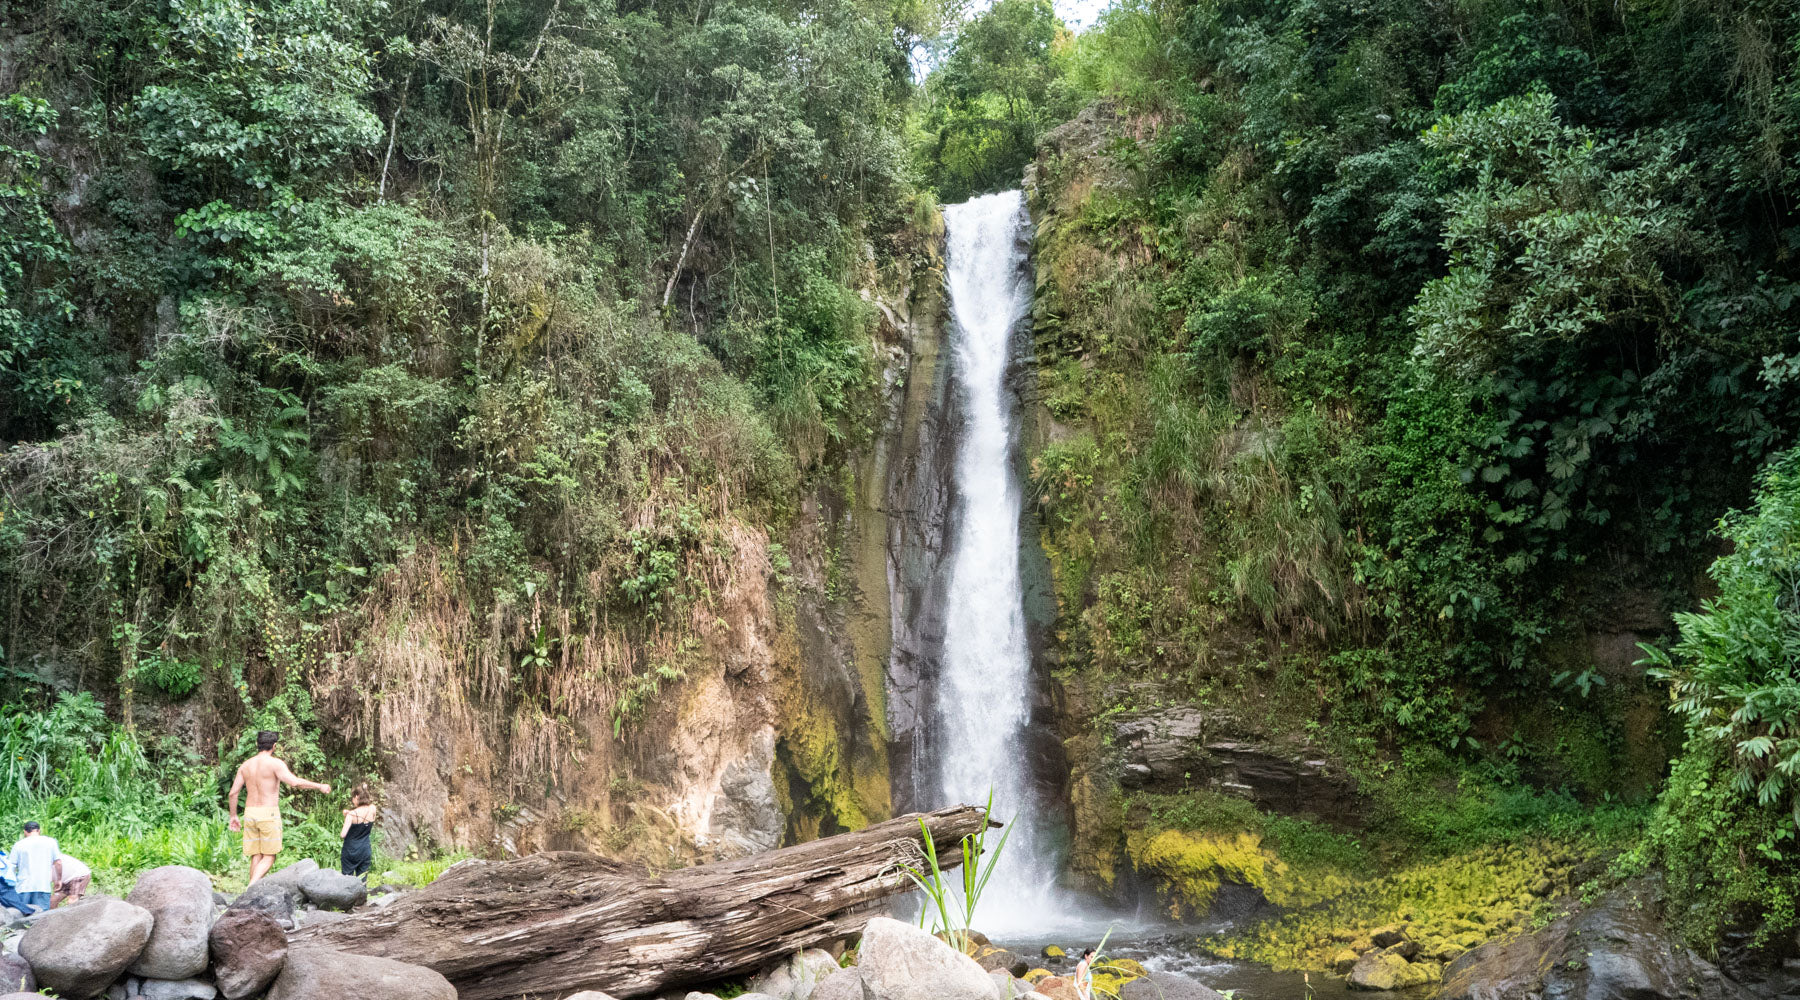 A view of the towering Aquiares waterfall, located on the Aquiares Estate coffee farm in Turrialba, Costa Rica.